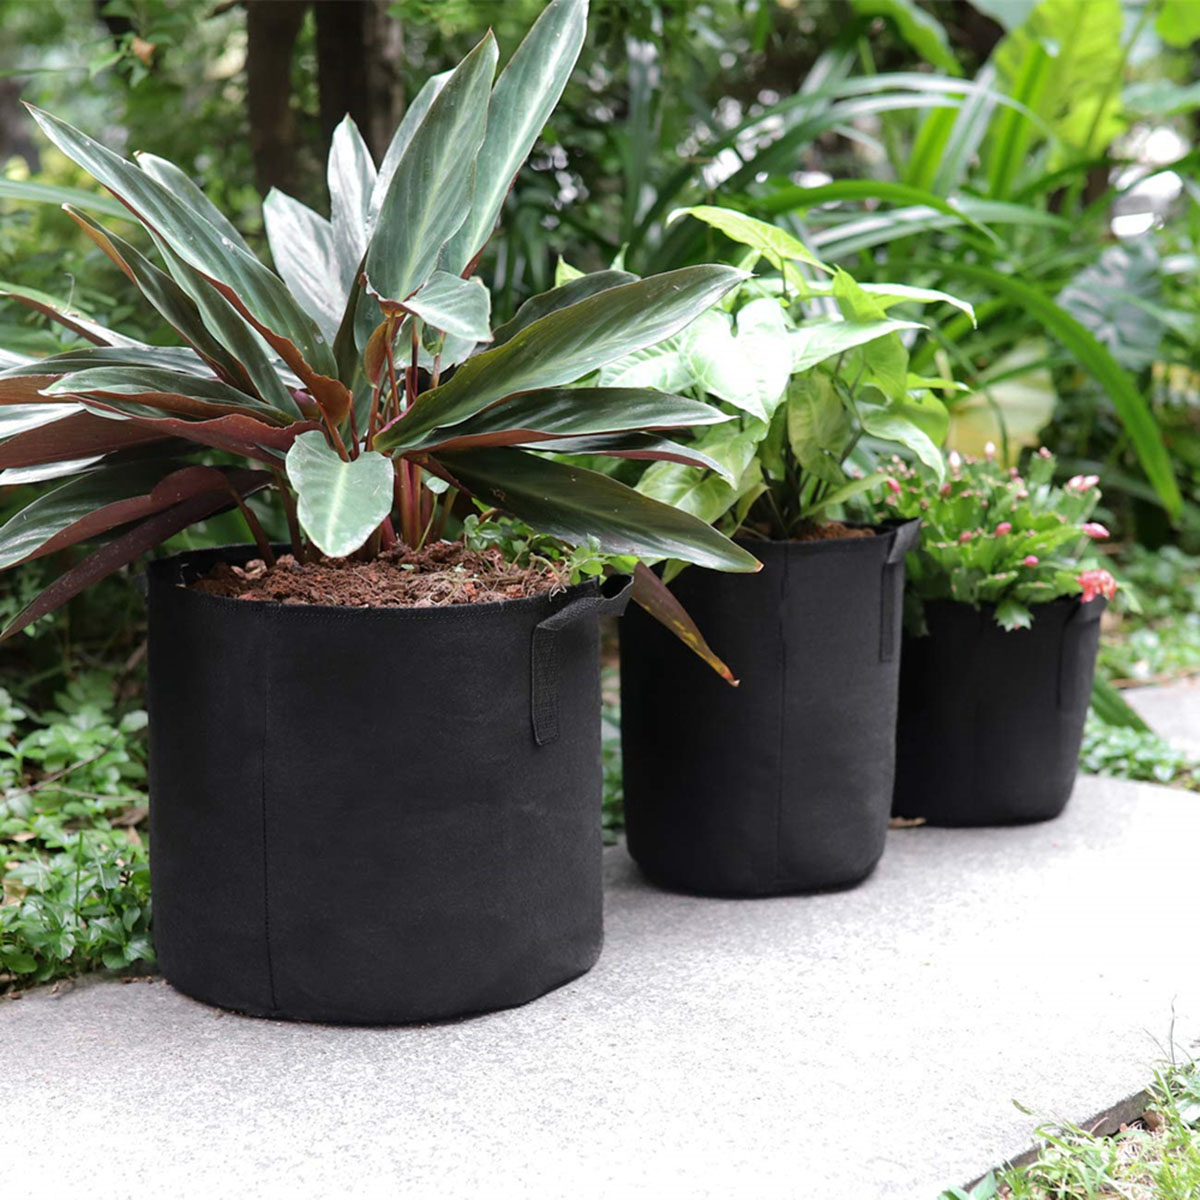 Non-woven-Fabric-Planting-Grow-Box-Vegetable-Flower-Pots-Bag-Planter-Black-with-Handles-1678096-5